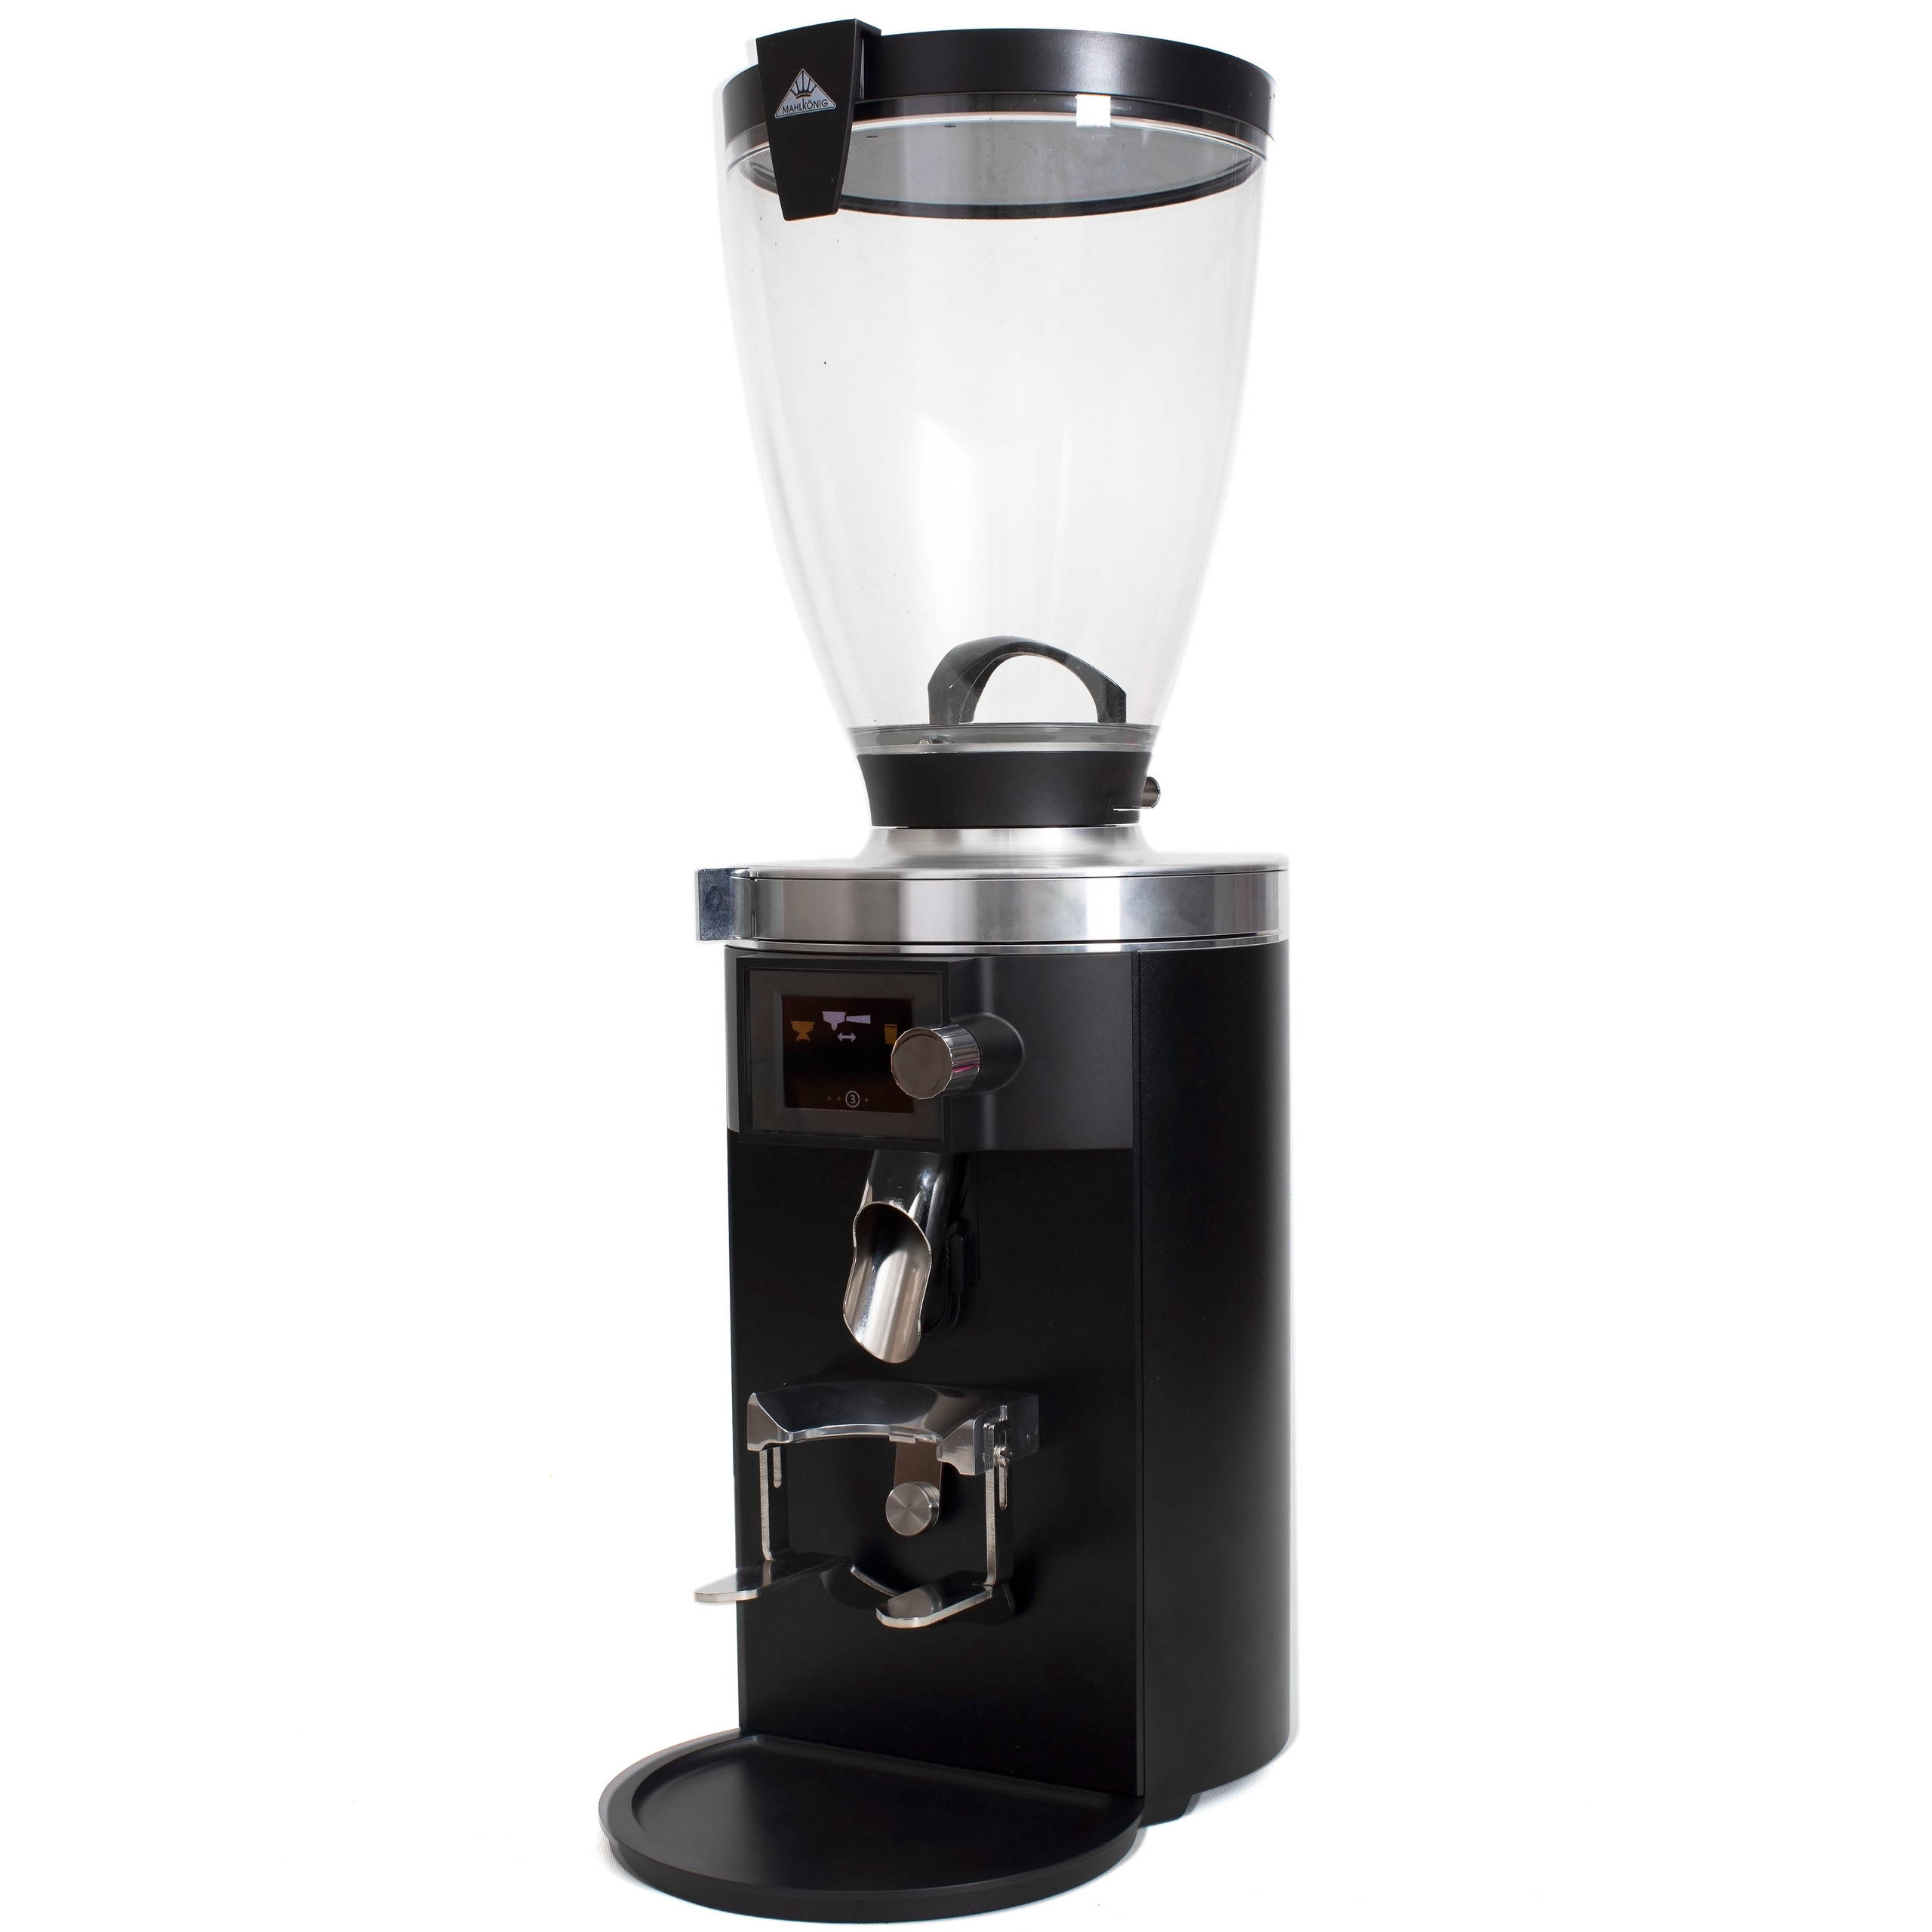 Best espresso grinder for cafe and commercial settings